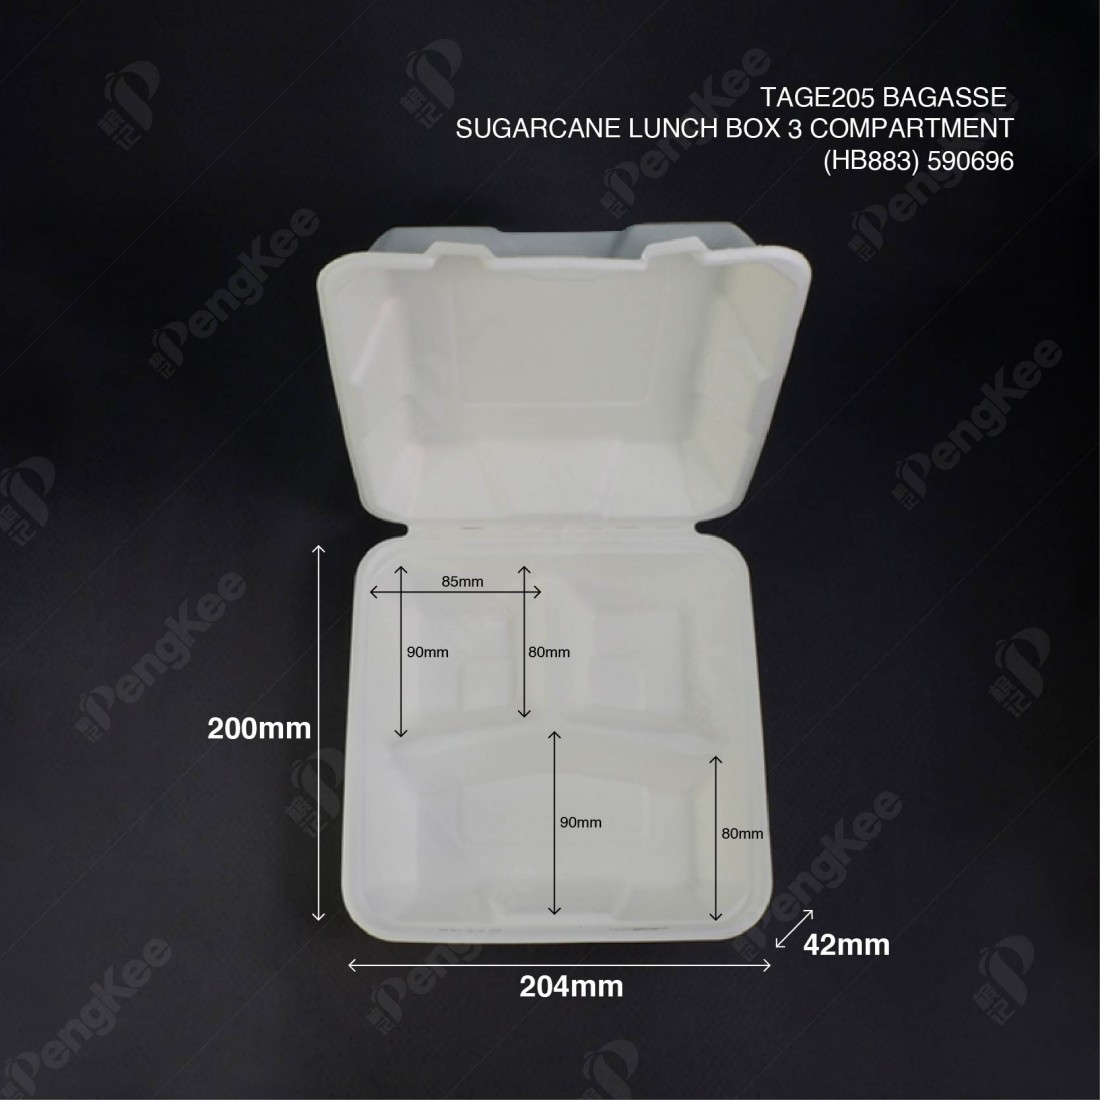 TAGE205 BAGASSE SUGARCANE LUNCH BOX 3 COMPARTMENT